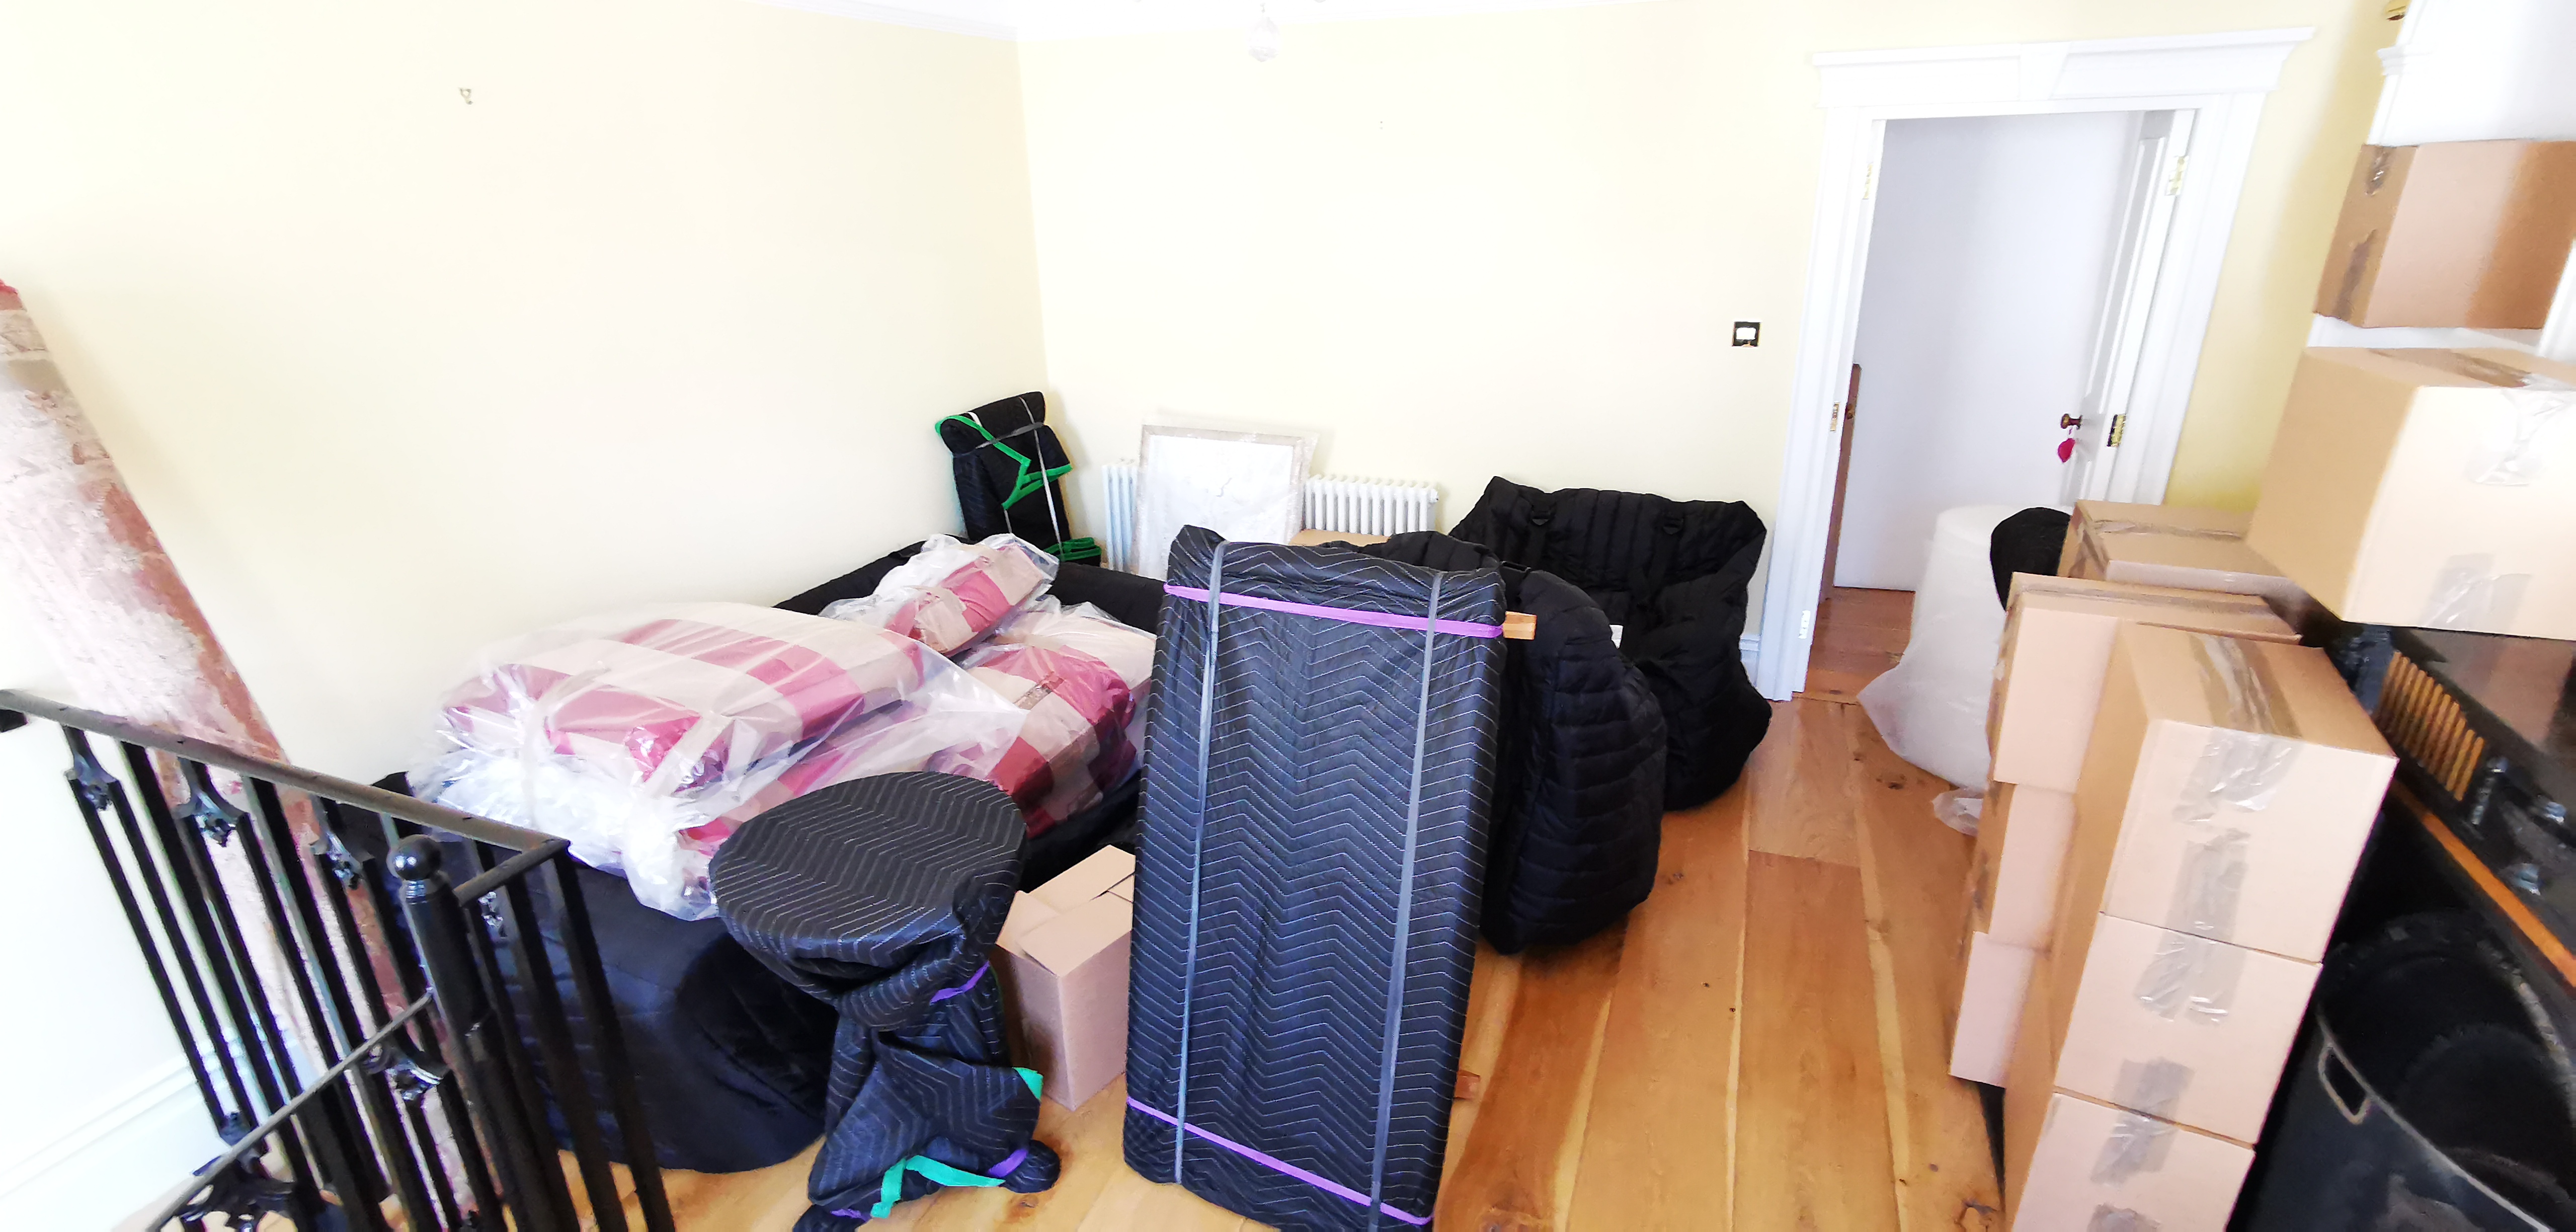 Packing services in Basingstoke